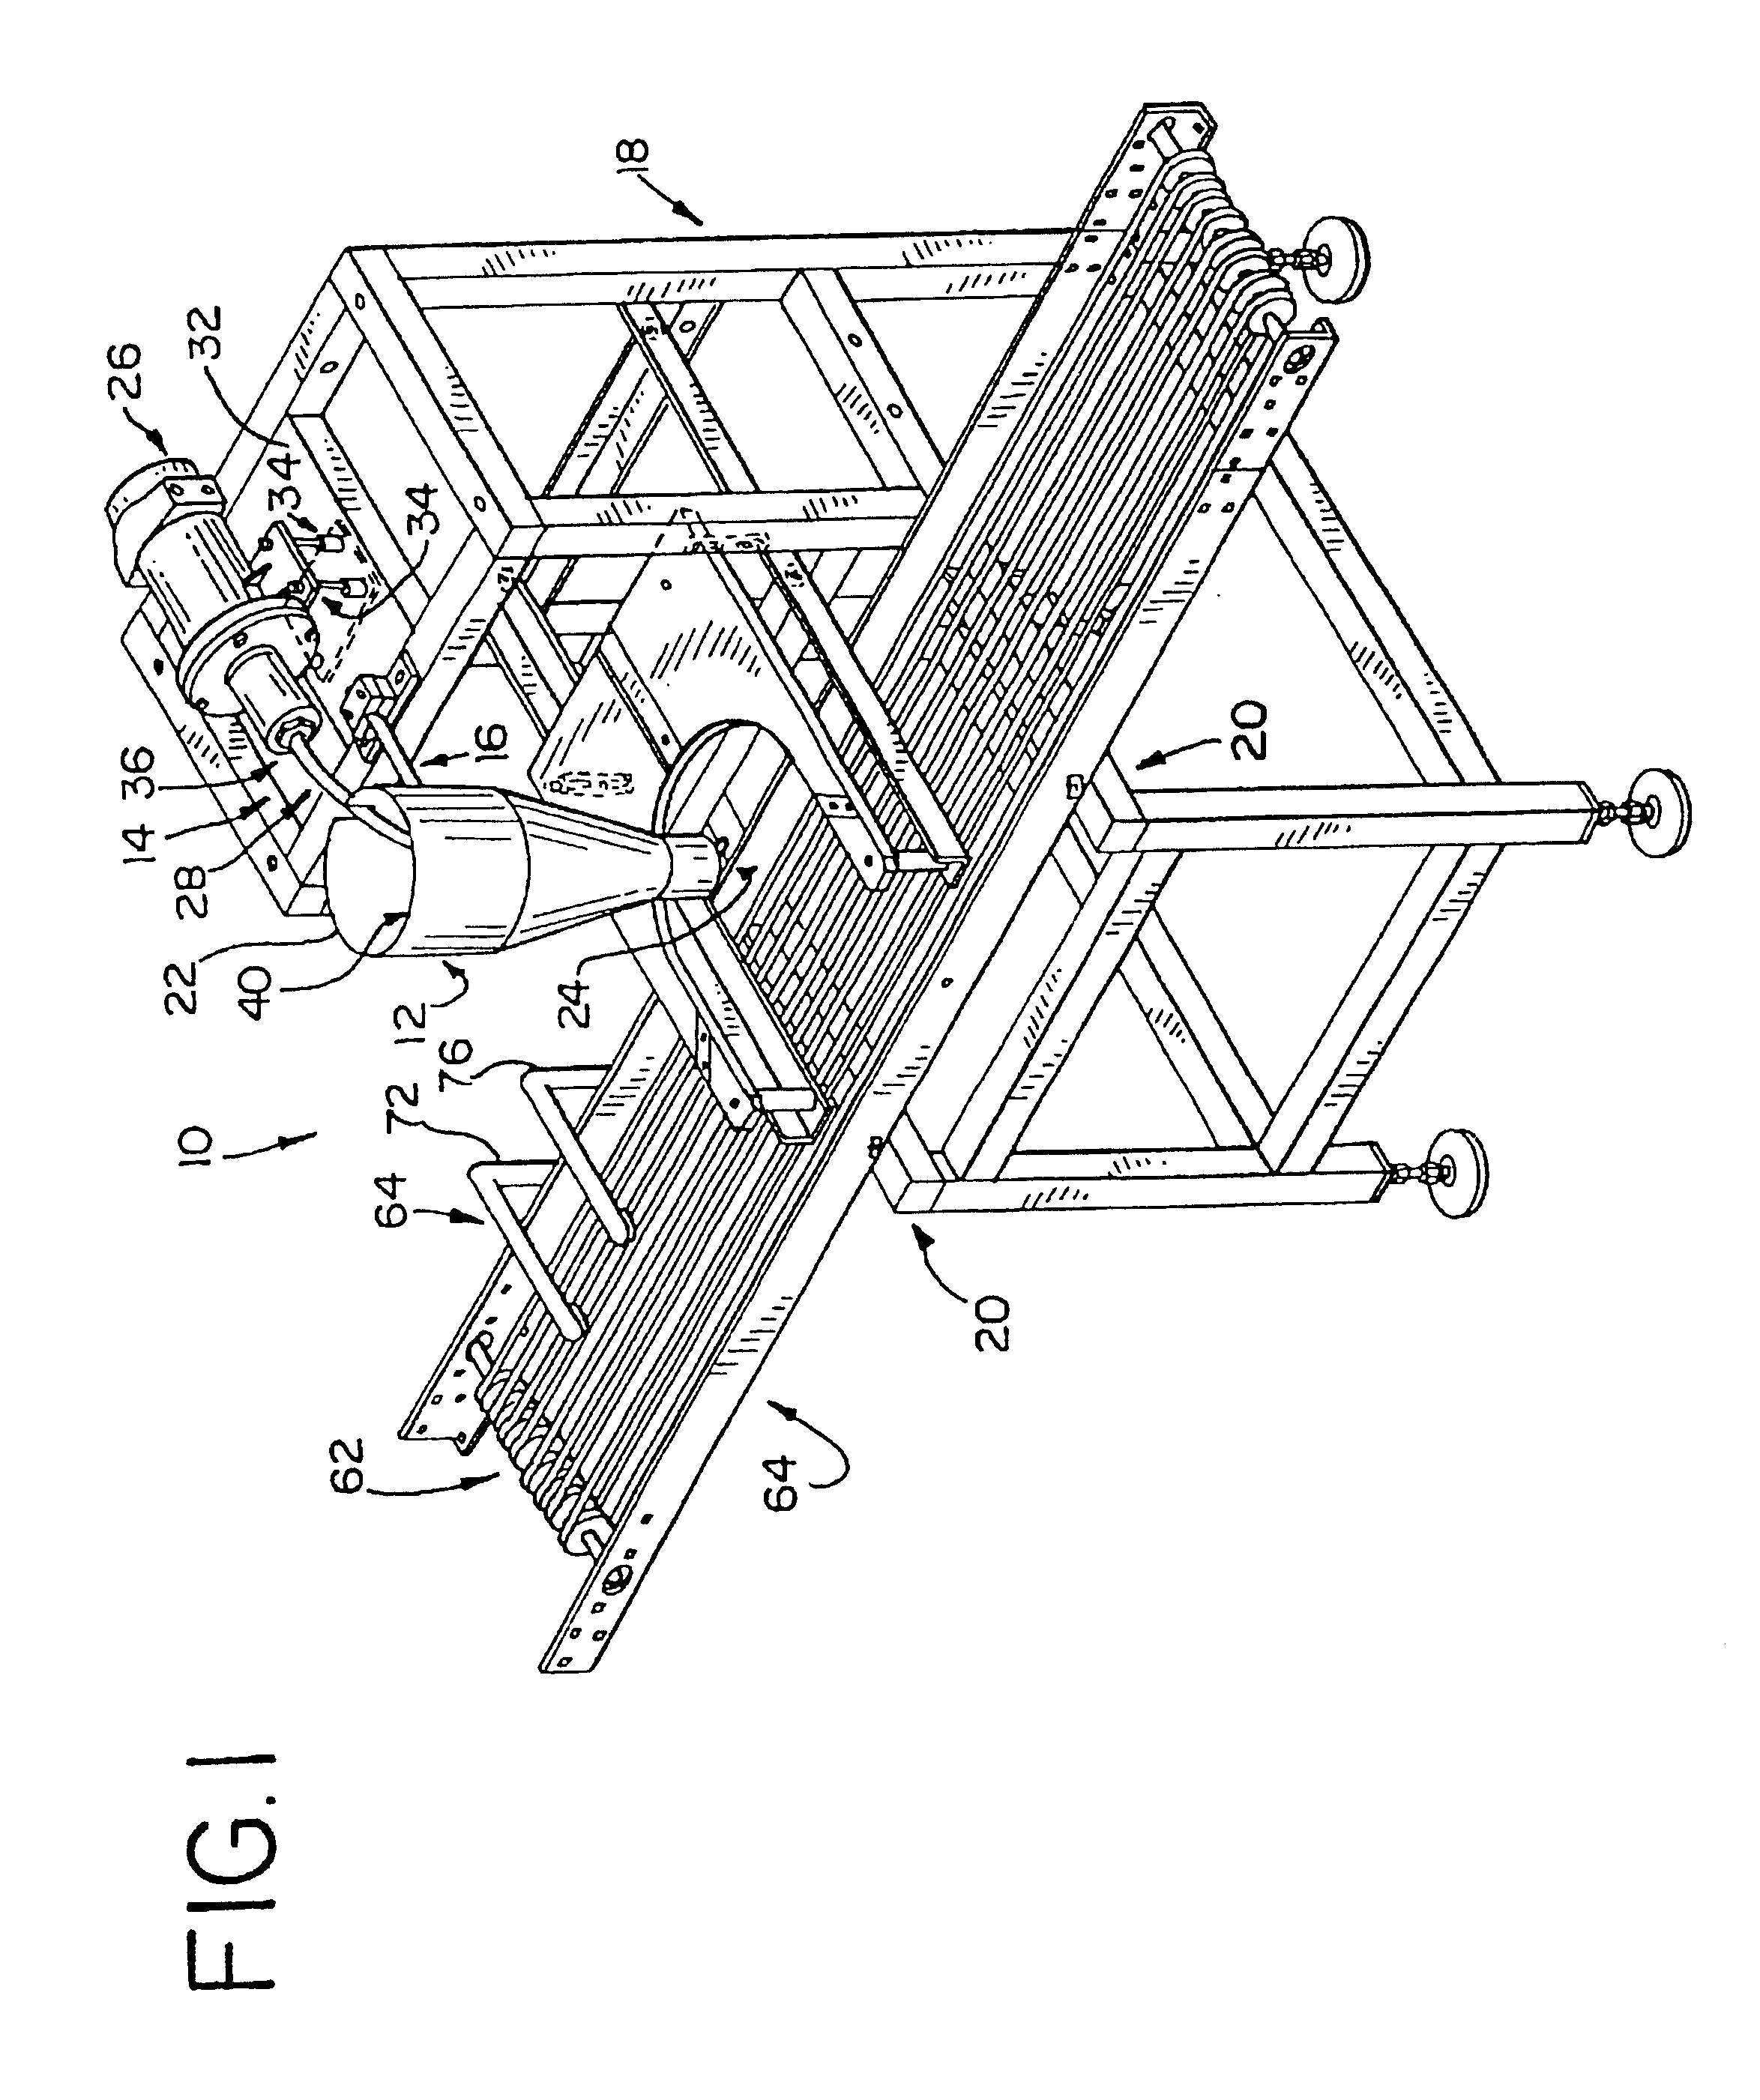 Apparatus for dispensing a quantity of material on a shell